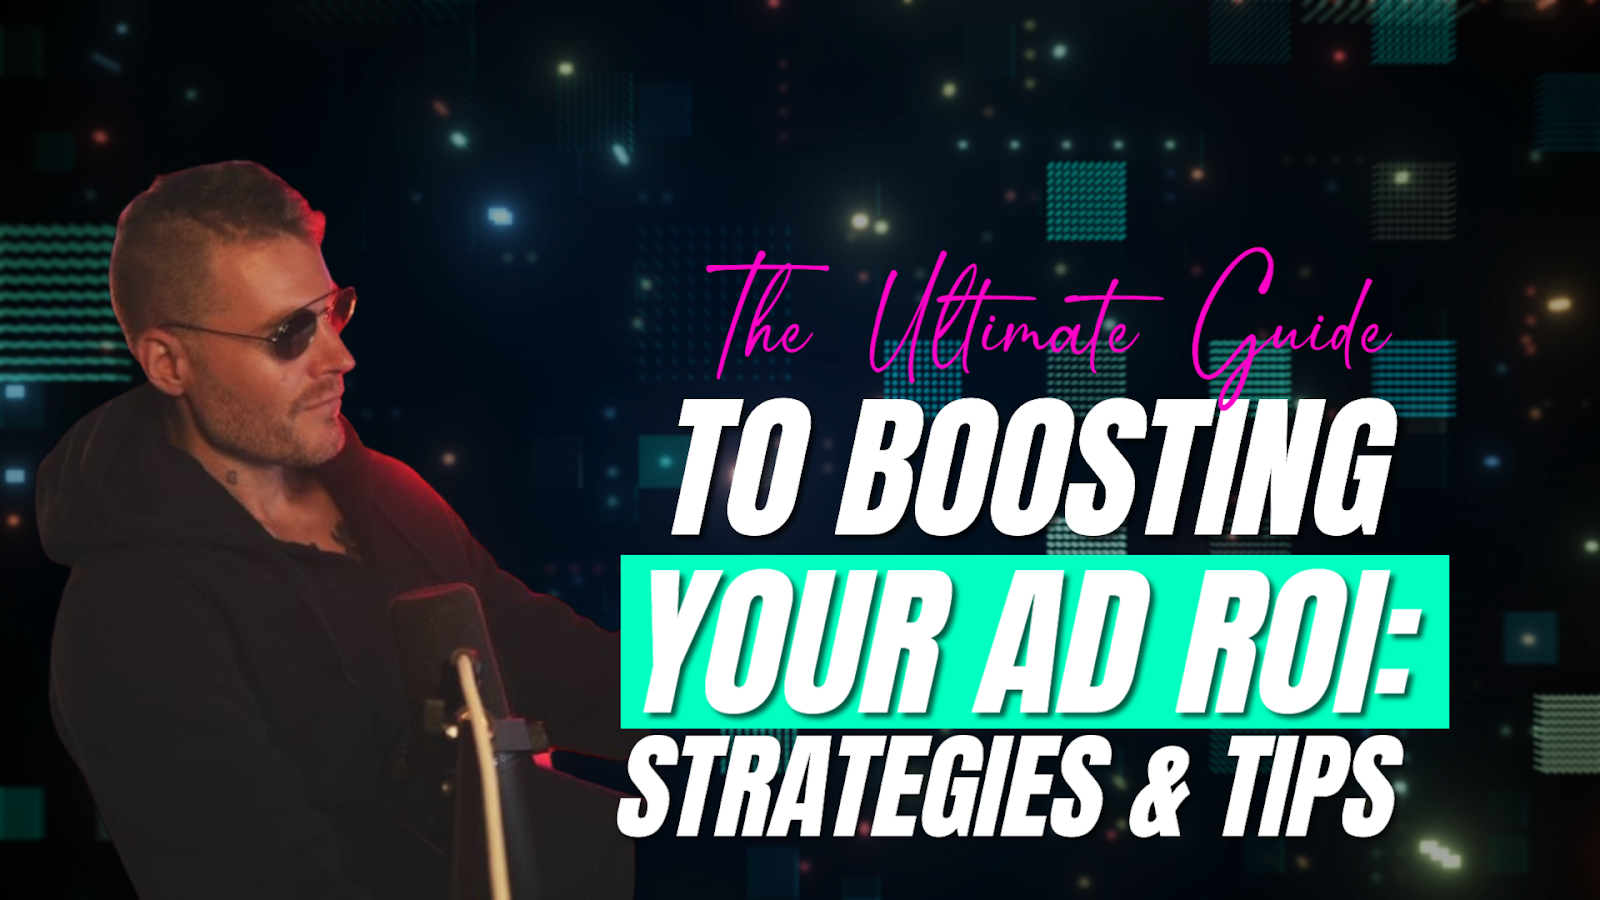 The Ultimate Guide to Boosting Your AD ROI: Strategies and Tips